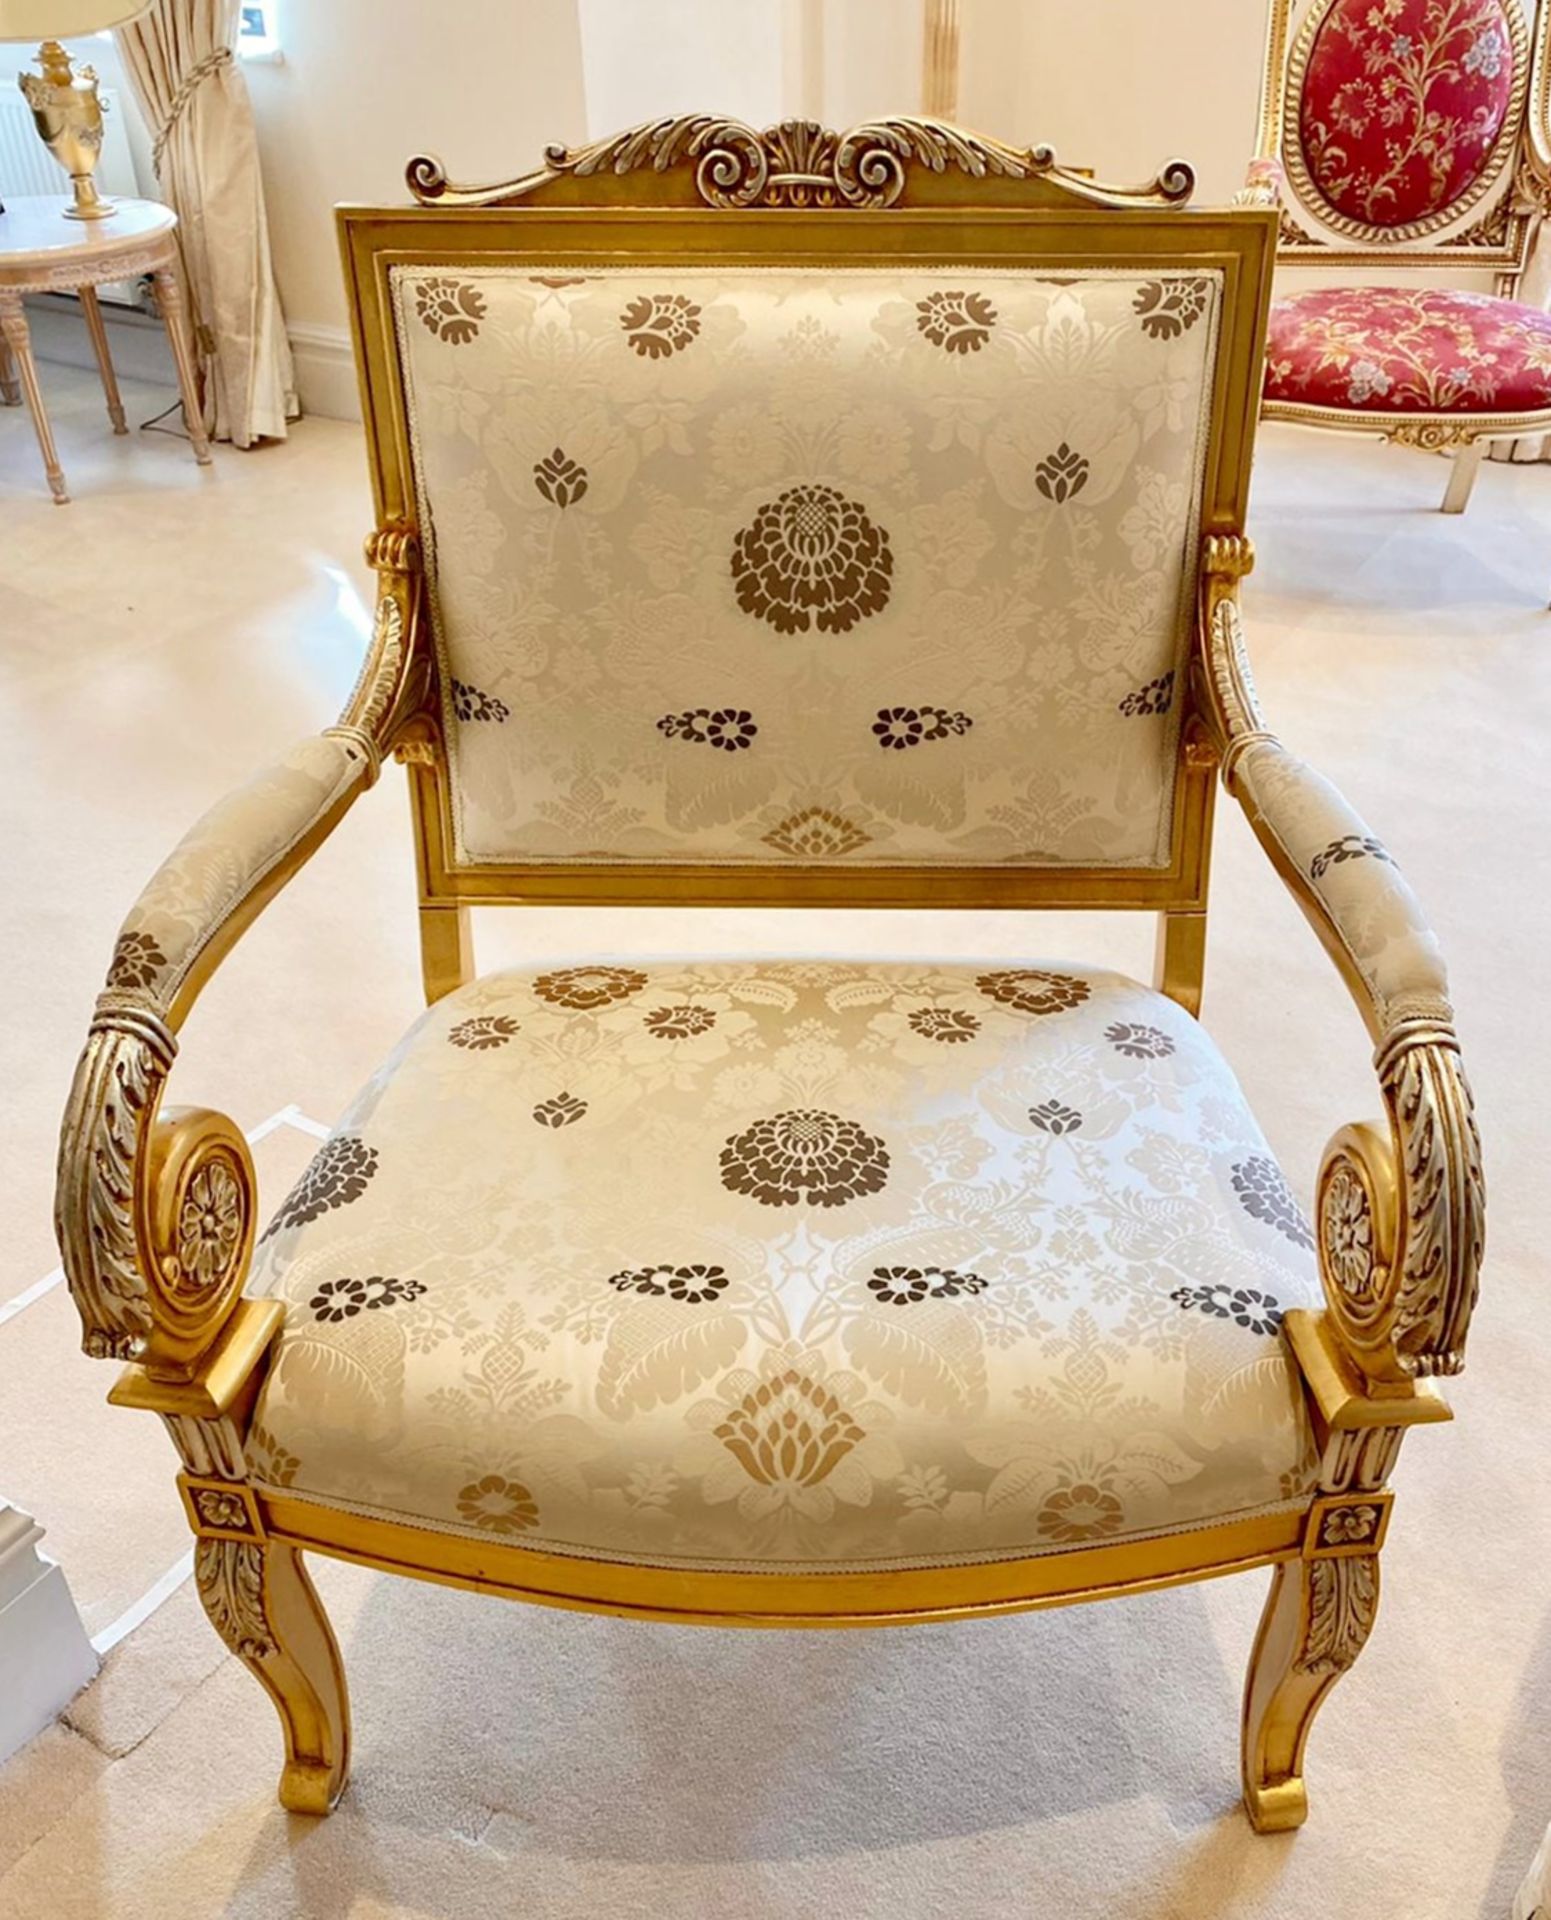 Pair of Scroll Arm Side Chair With Beautiful Carving and Bespoke Upholstery - Size: H105/46 x W75  x - Image 2 of 25